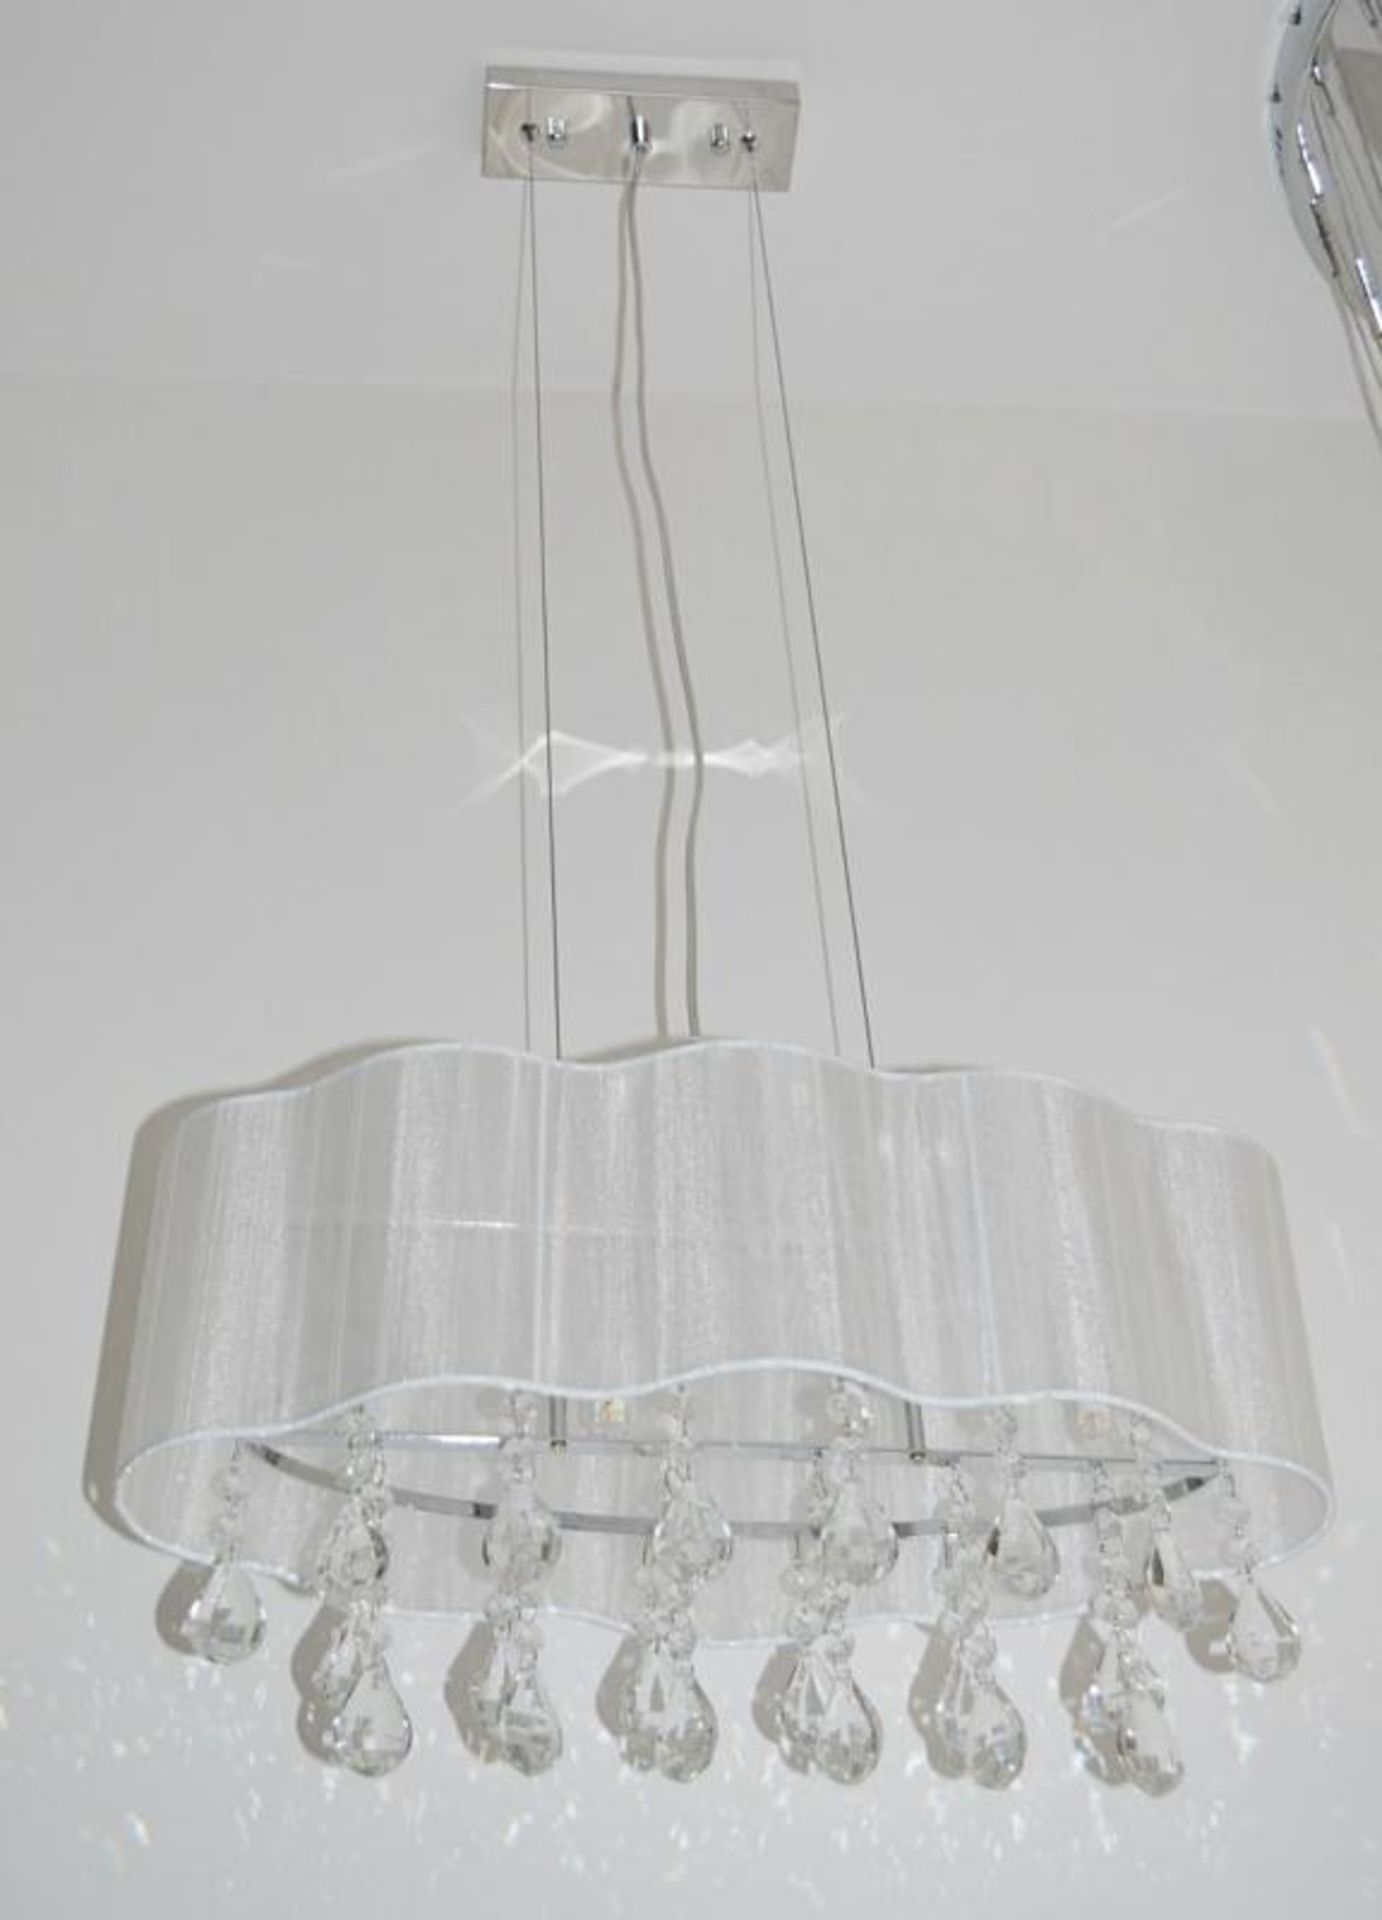 1 x Large Pleated 4-Light Ceiling Light - Features Clear Crystal Glass Drops And A Cream Voile Shade